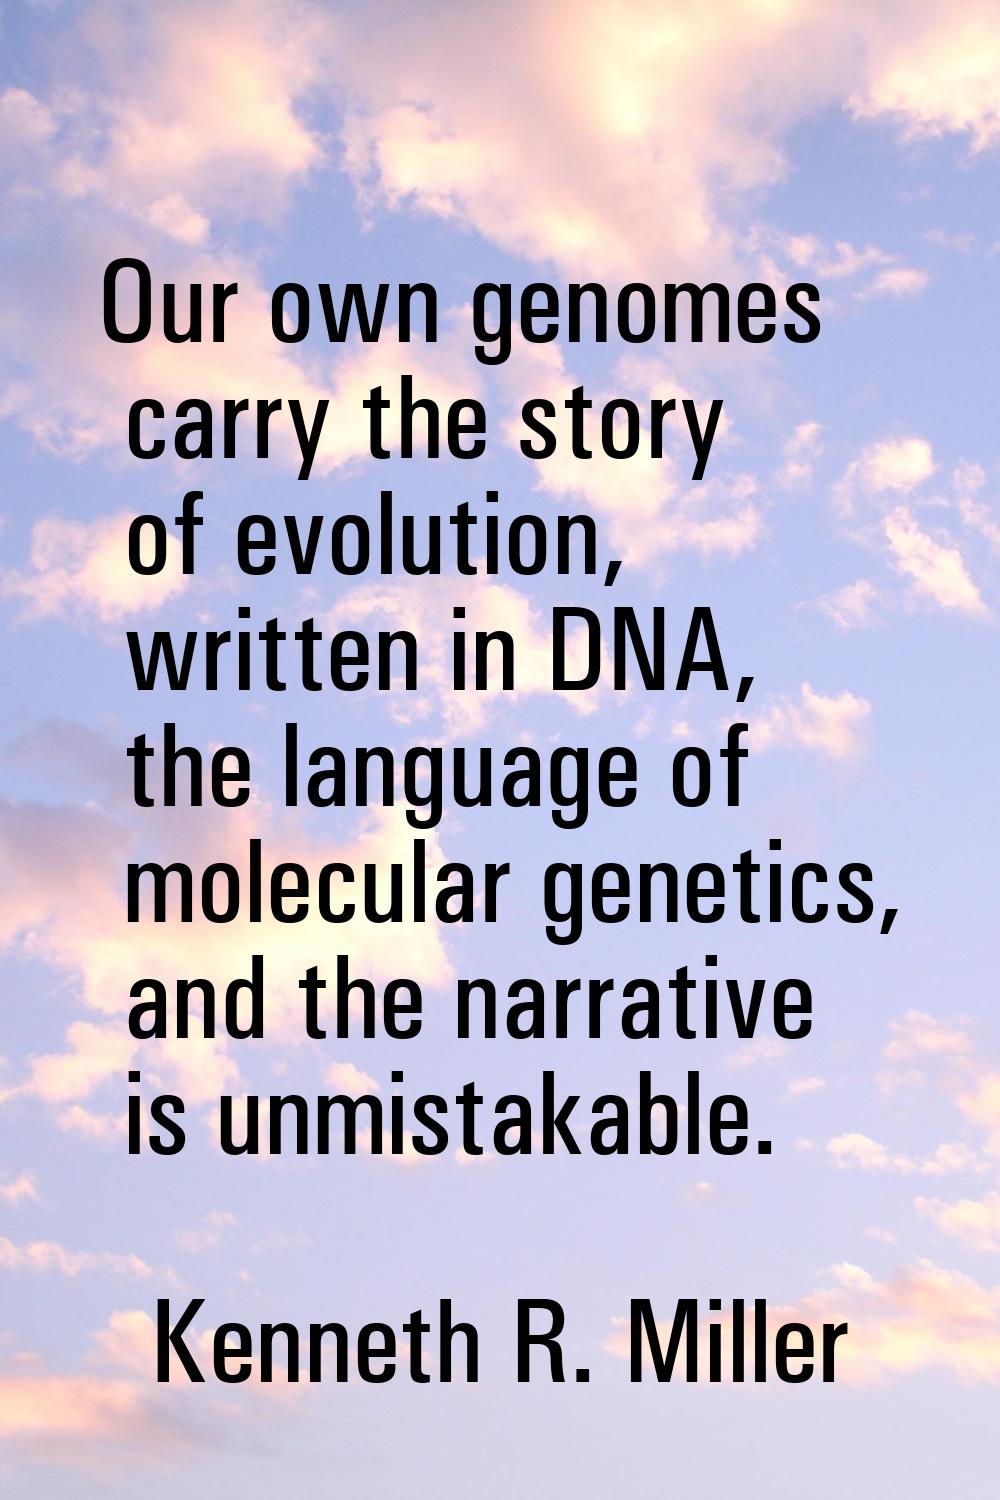 Our own genomes carry the story of evolution, written in DNA, the language of molecular genetics, a